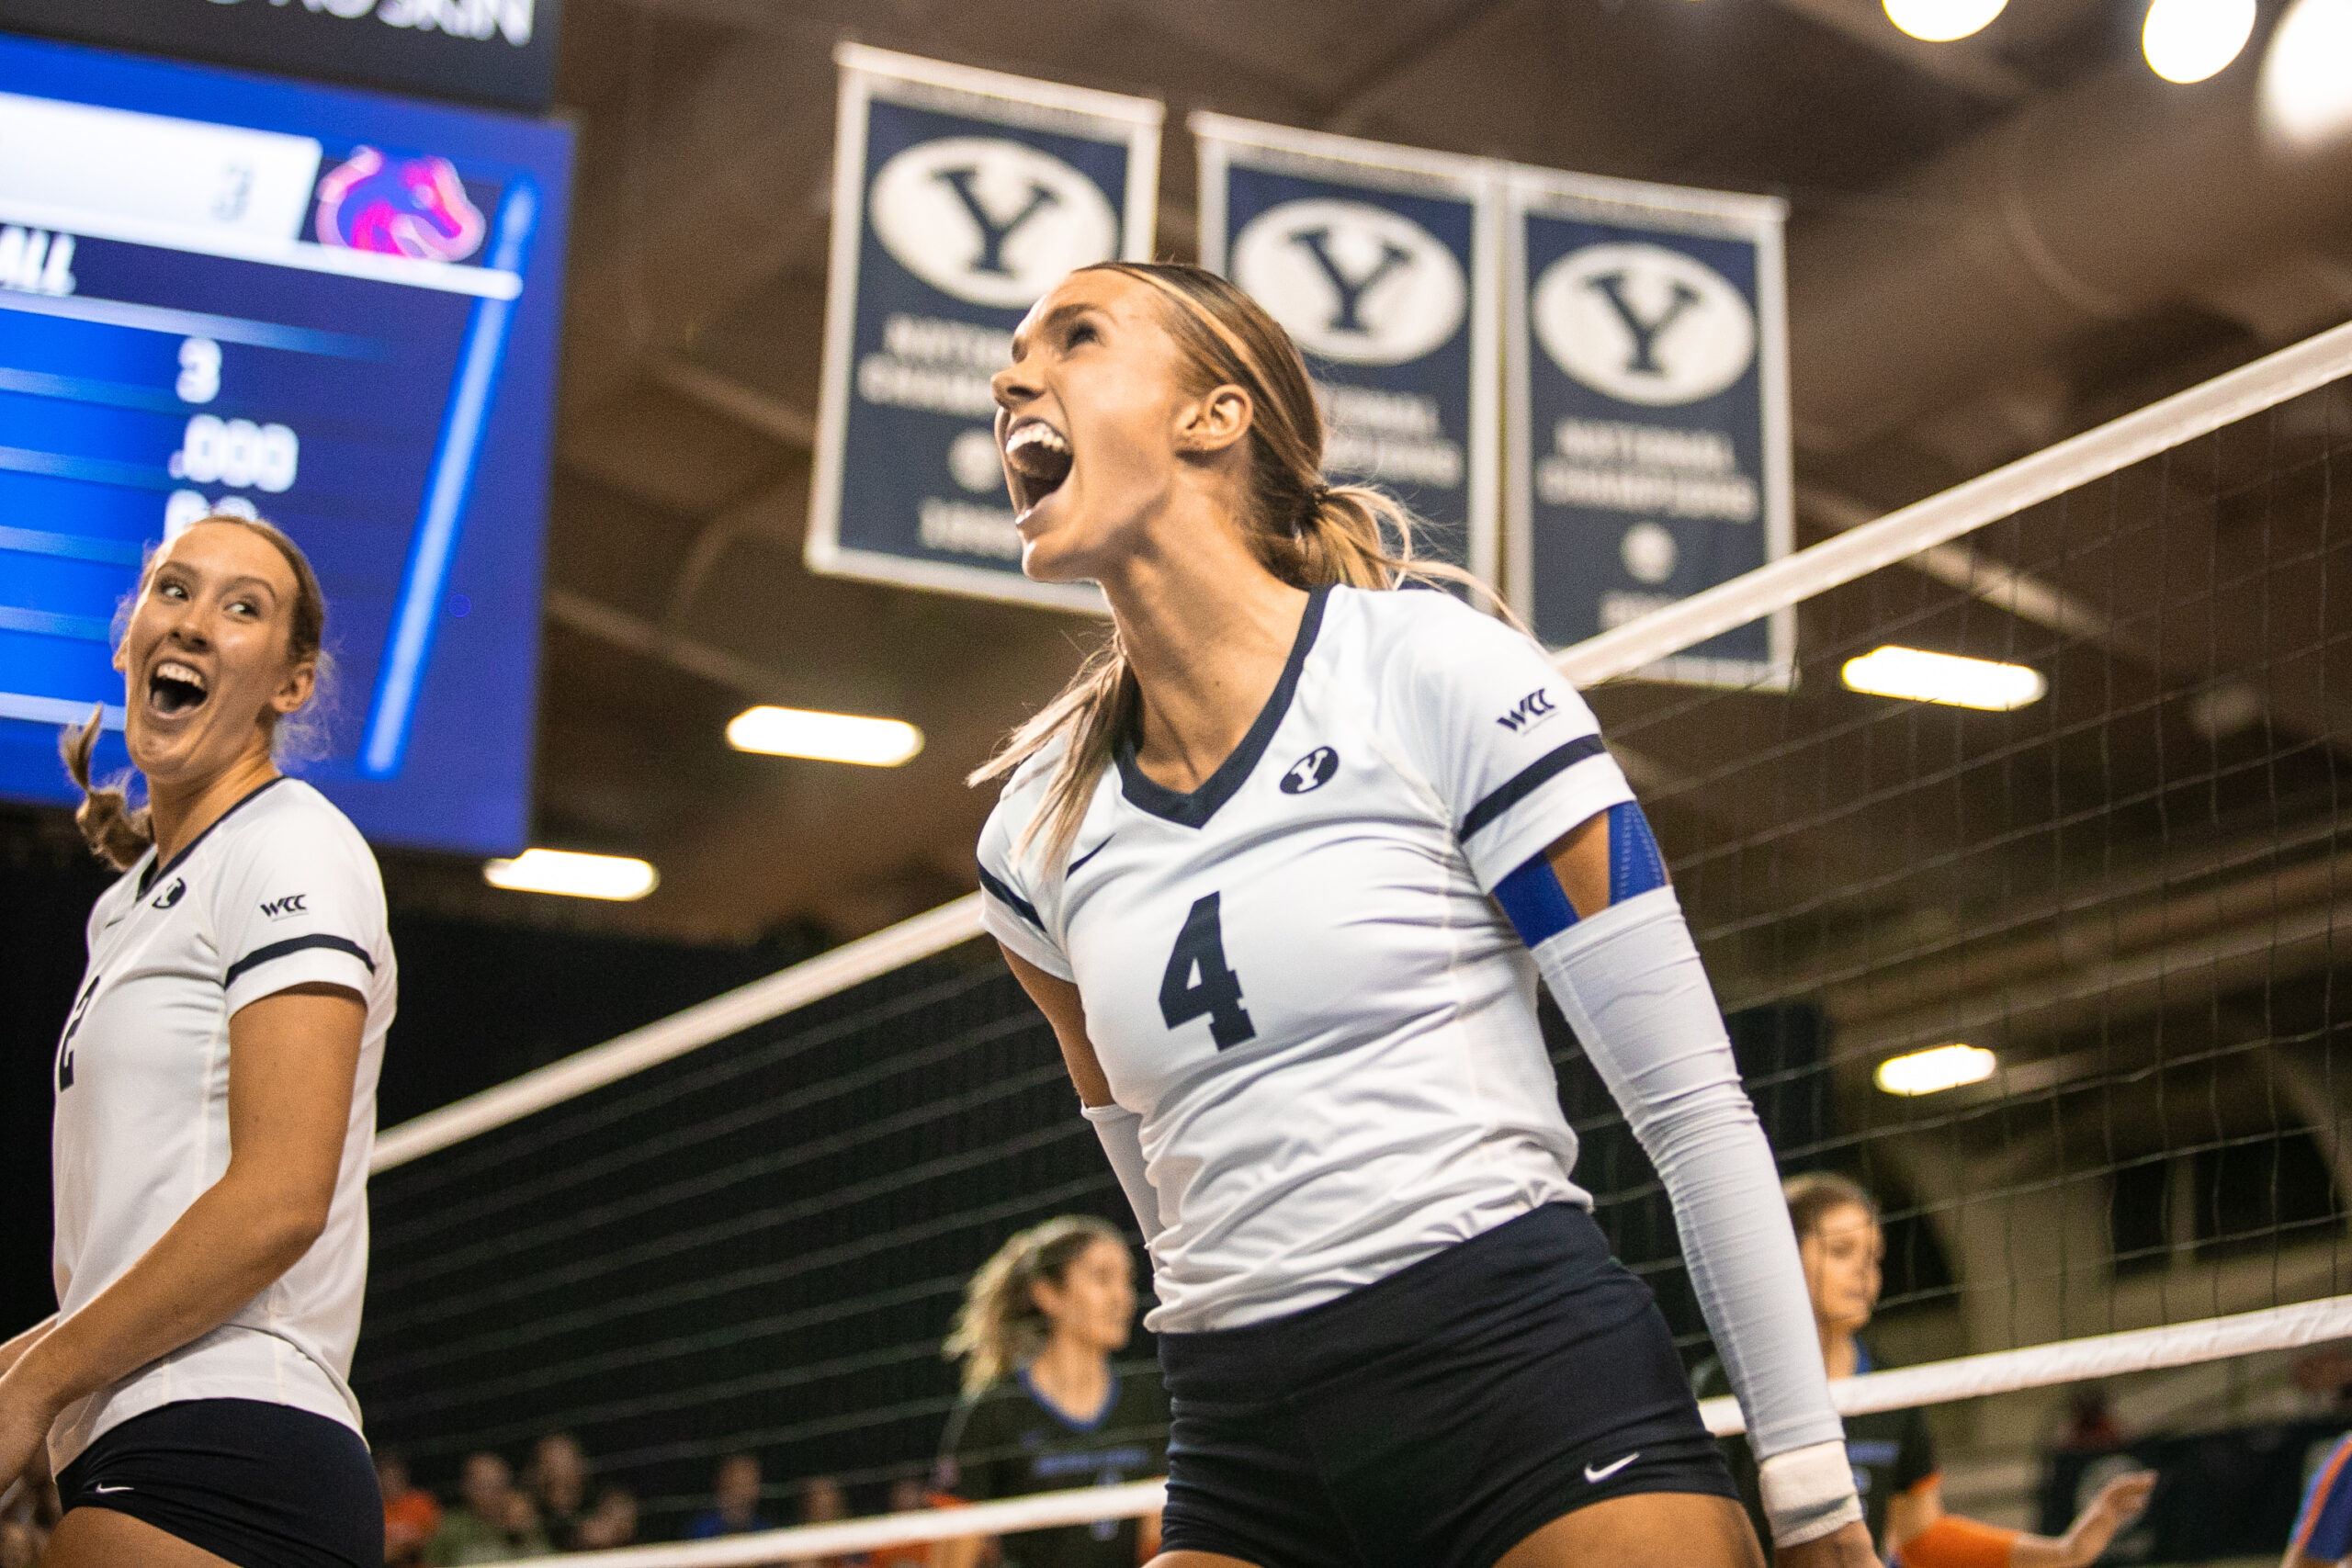 BYU women's volleyball sweeps Boise State in NCAA Tournament opener